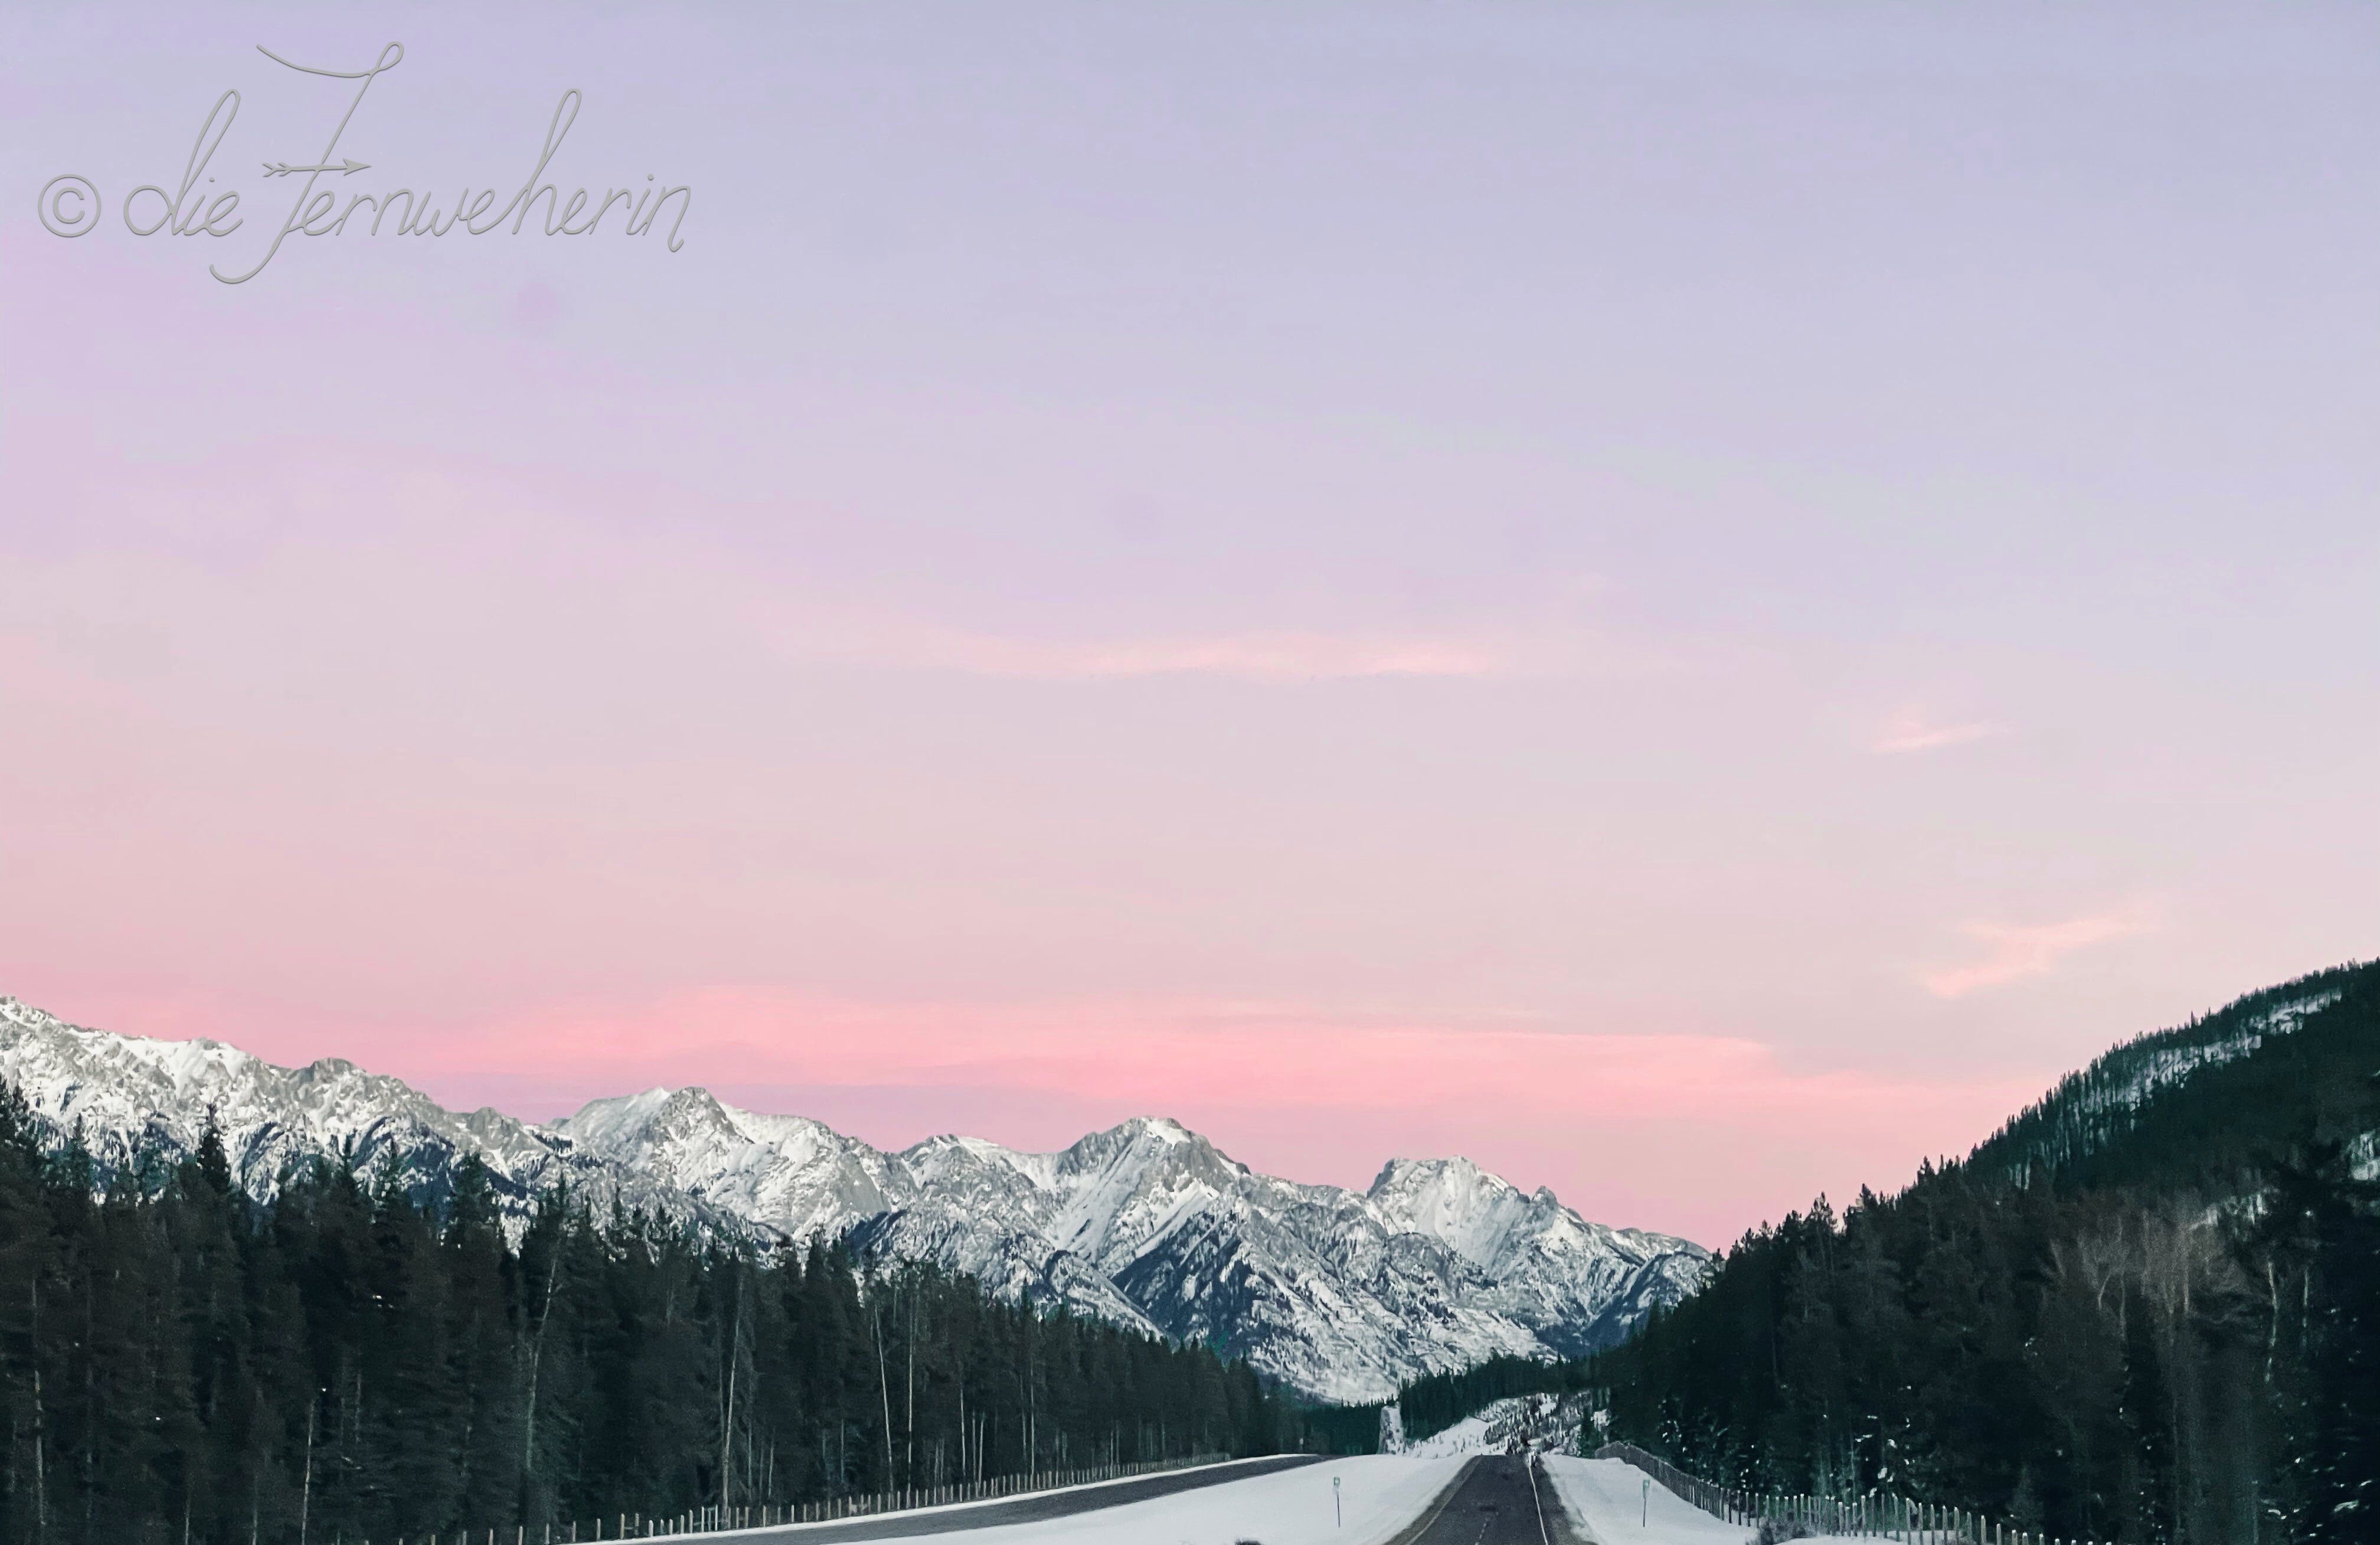 Sunset along Highway 1 in Banff National Park causes a pink "alpine glow" over the mountains.